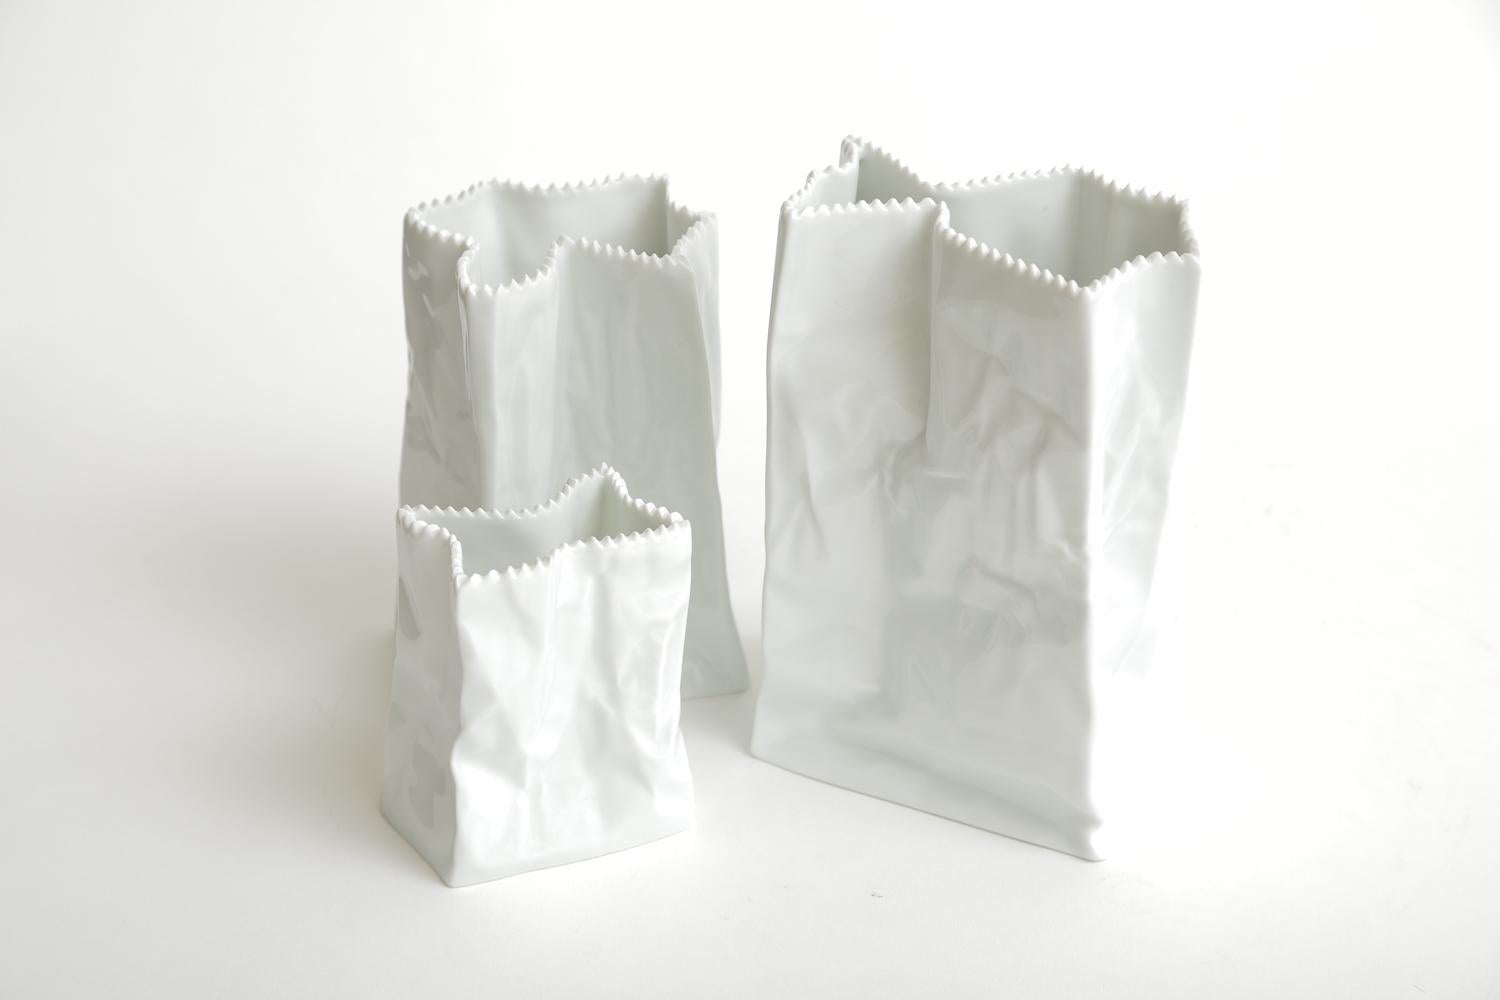 This vintage set of 3 complete ceramic crushed bags of white porcelain were manufactured by Rosenthal and designed by Tapio Wirkkala in the 1970s. They are called 